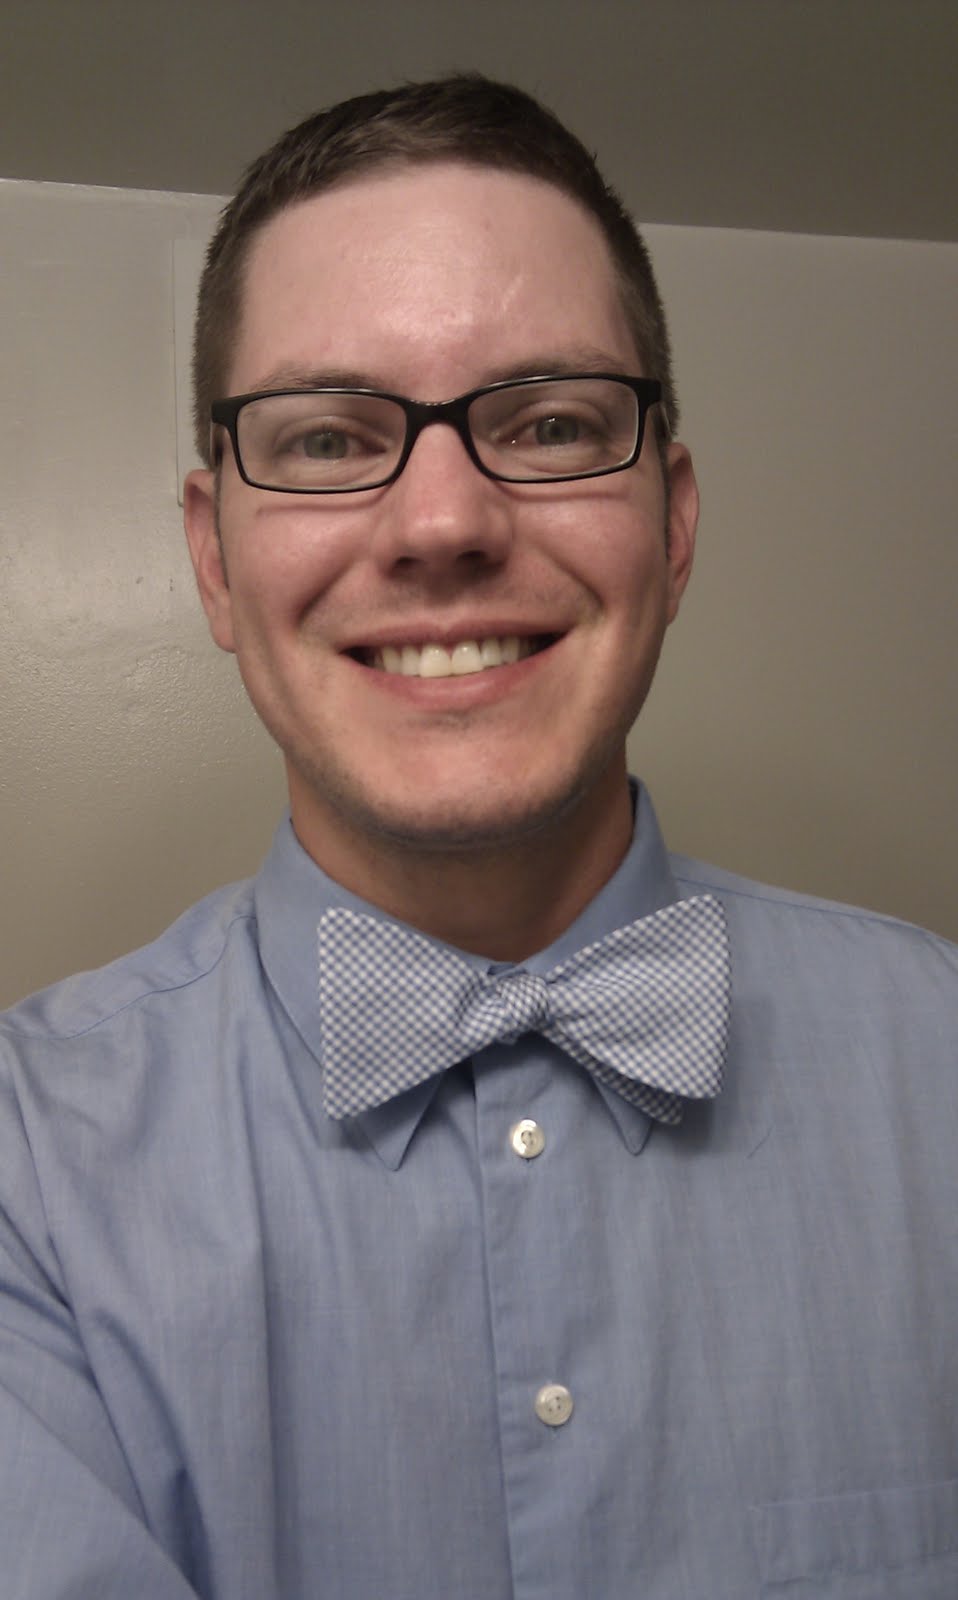 Engineering a Bow Tie